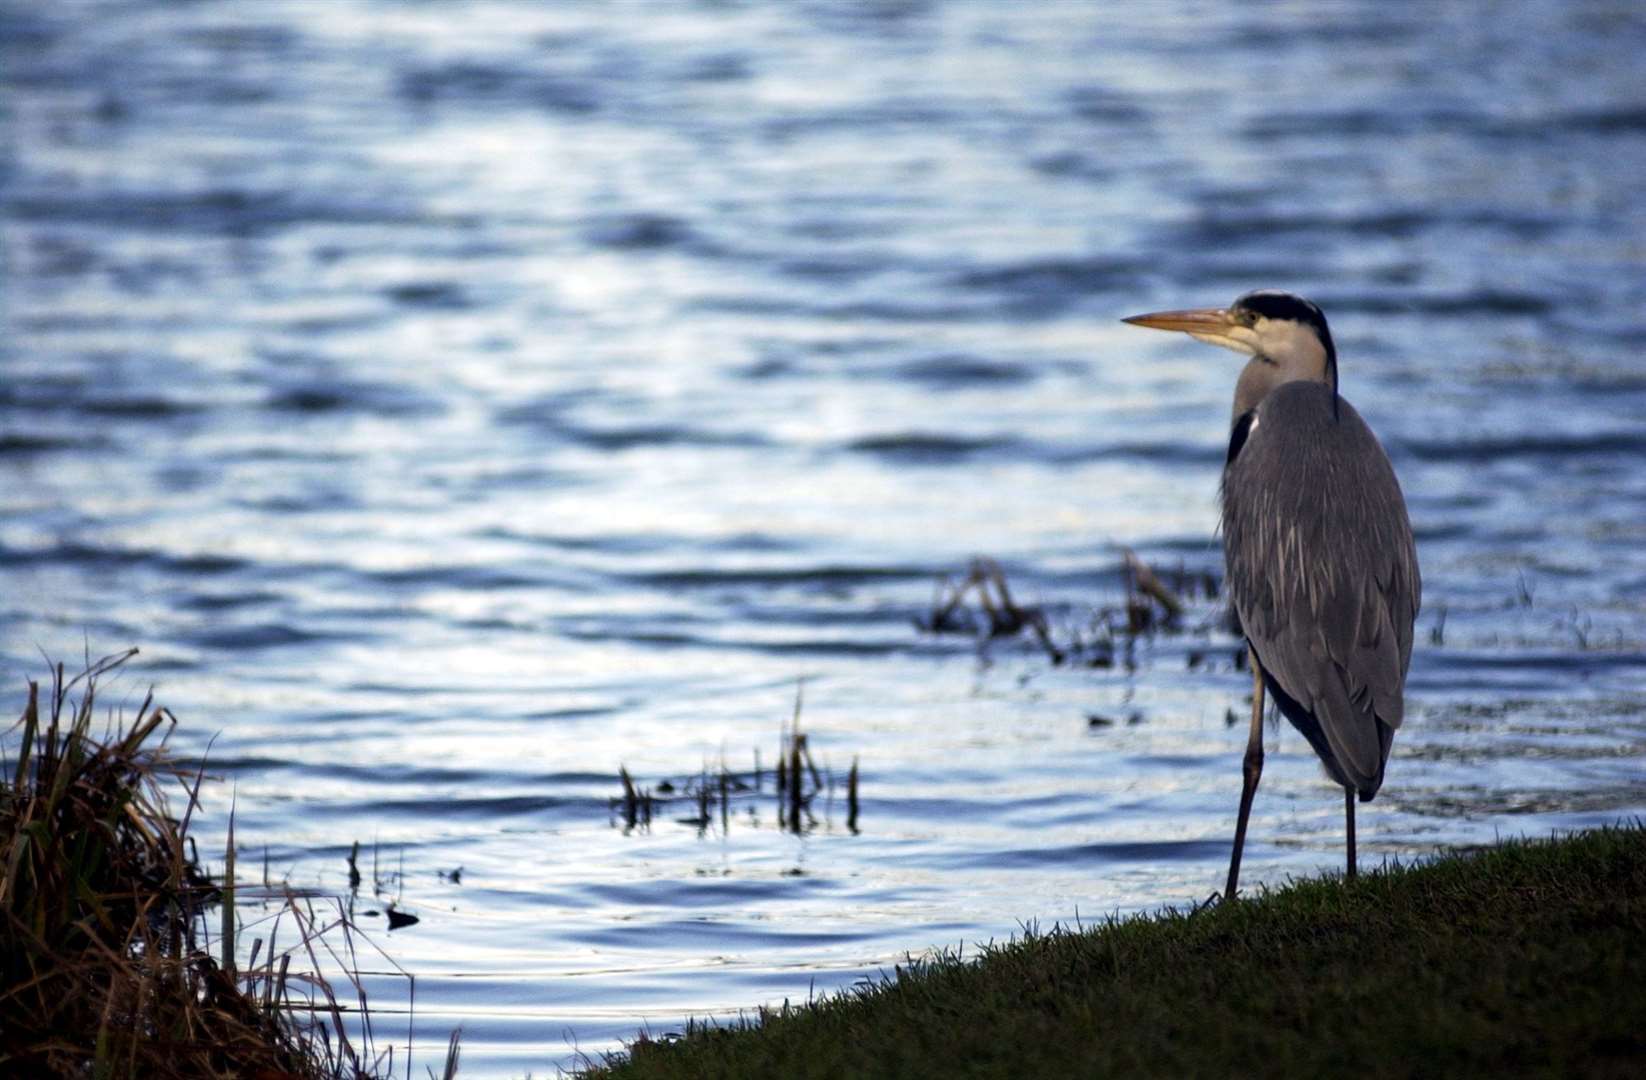 The reservoir is hoped to attract more wildlife